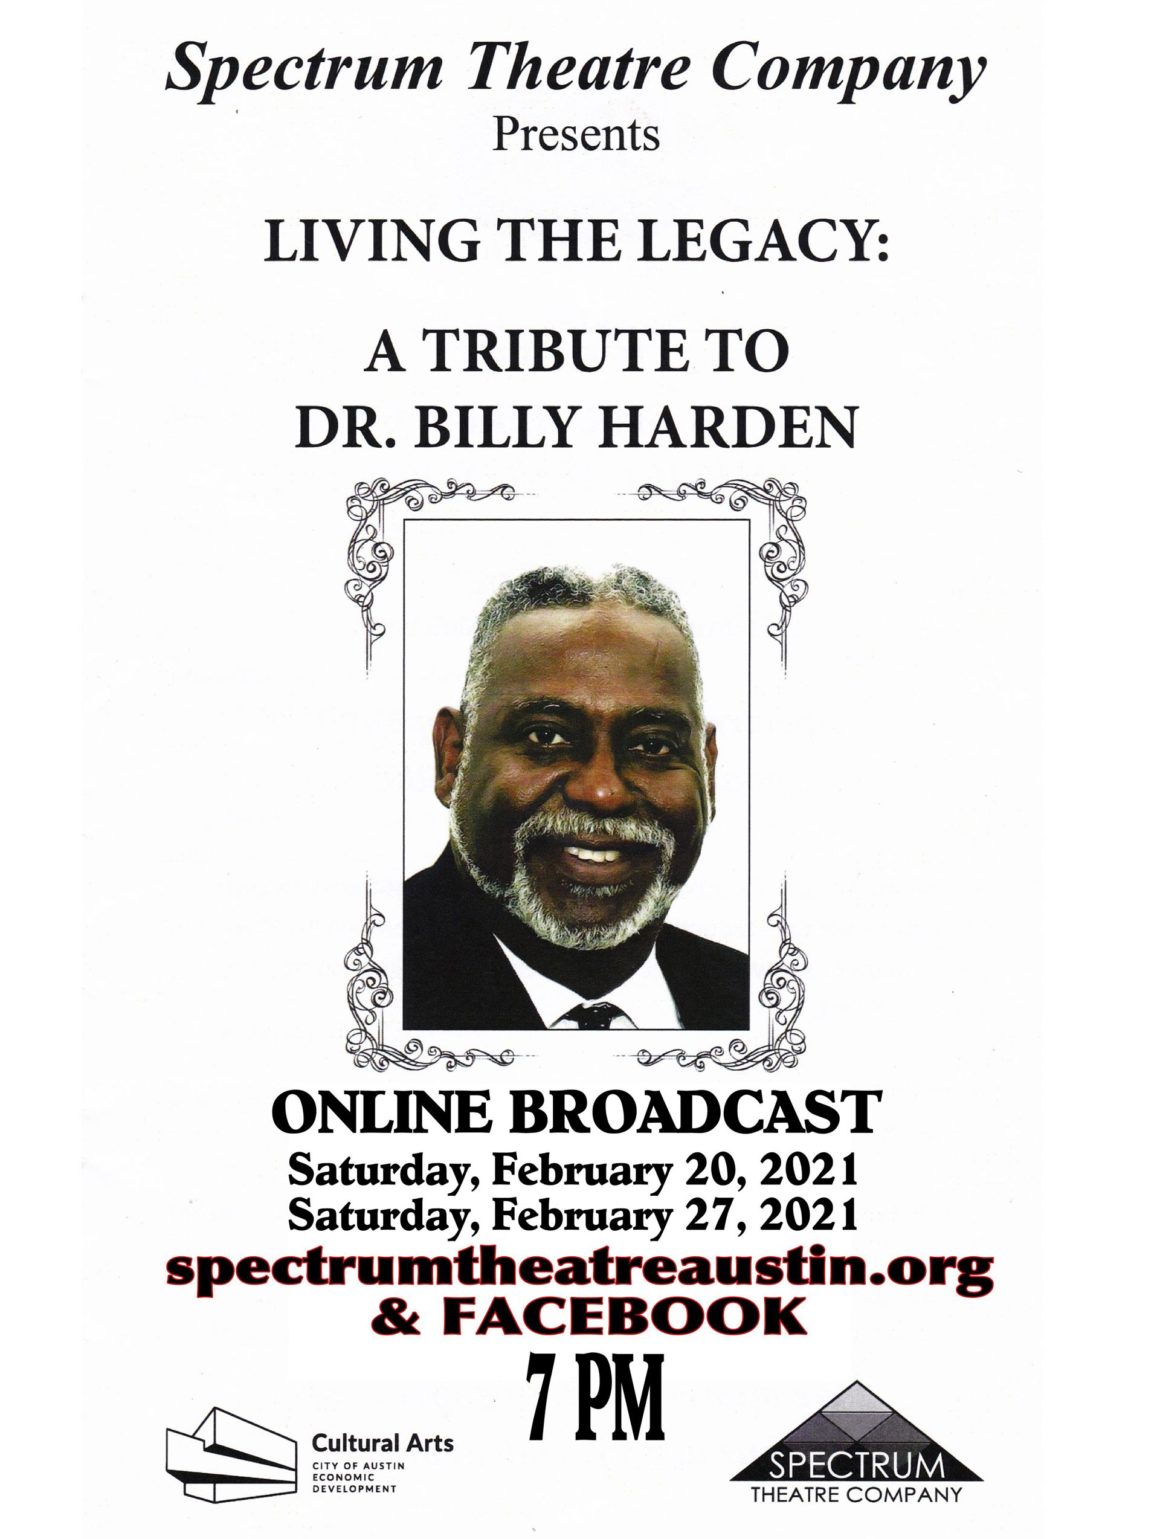 TRIBUTE TO DR. BILLY HARDEN